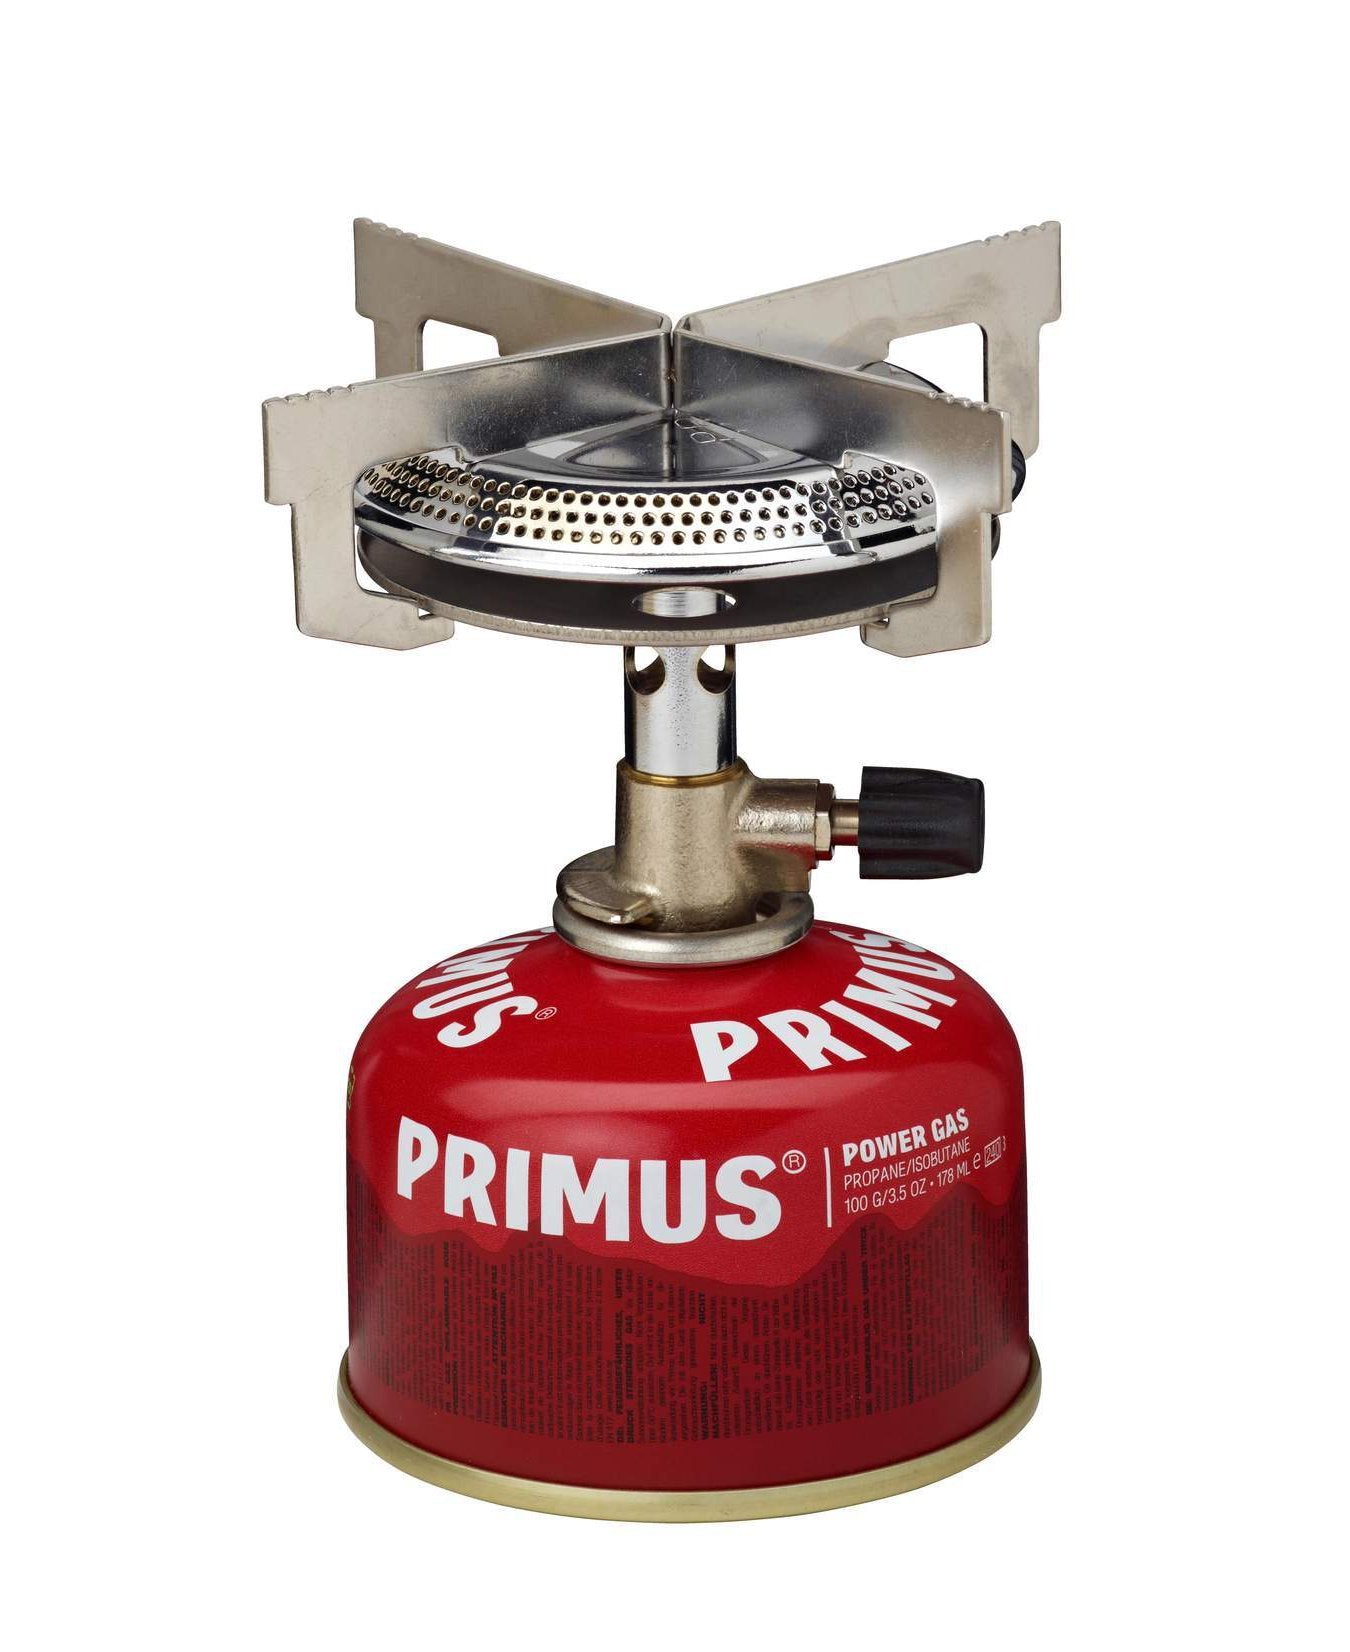 Primus Mimer Stove | Primus Camping Stoves and Cookers | NZ